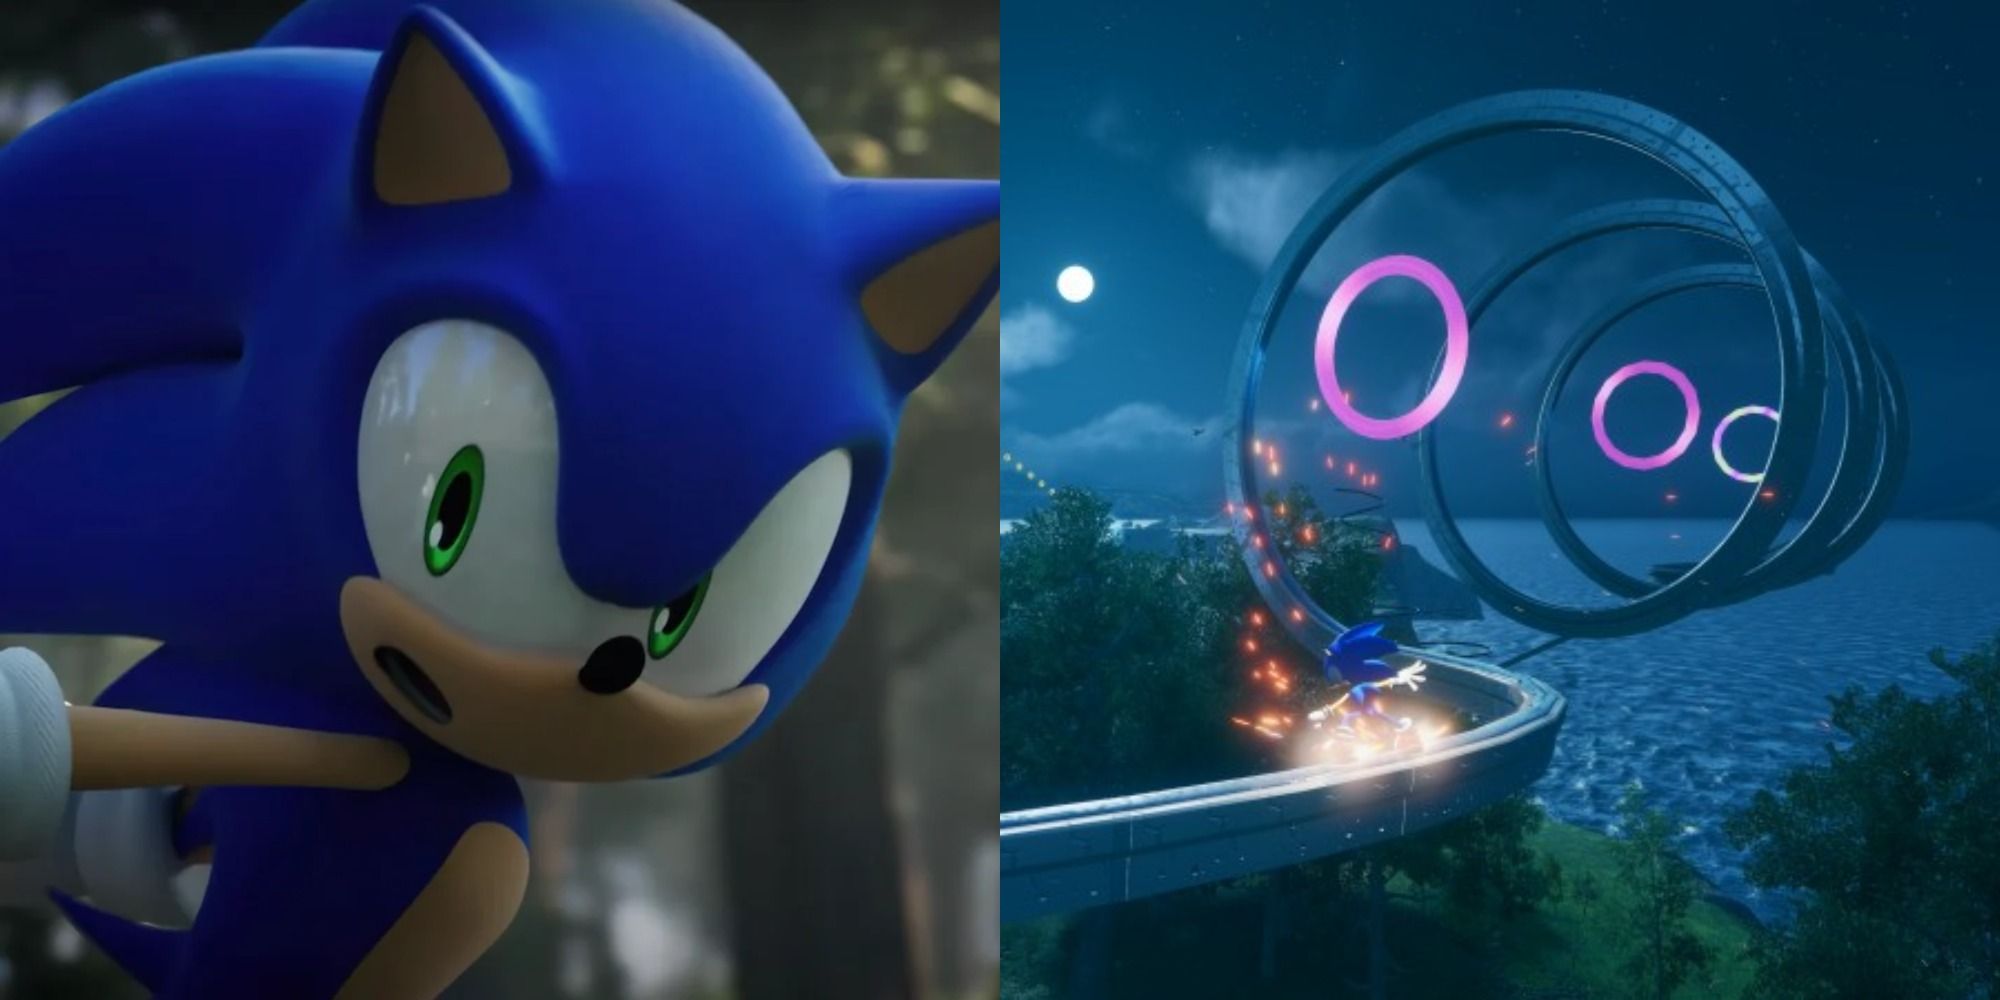 Split image showing Sonic and his power rings in Sonic Frontiers